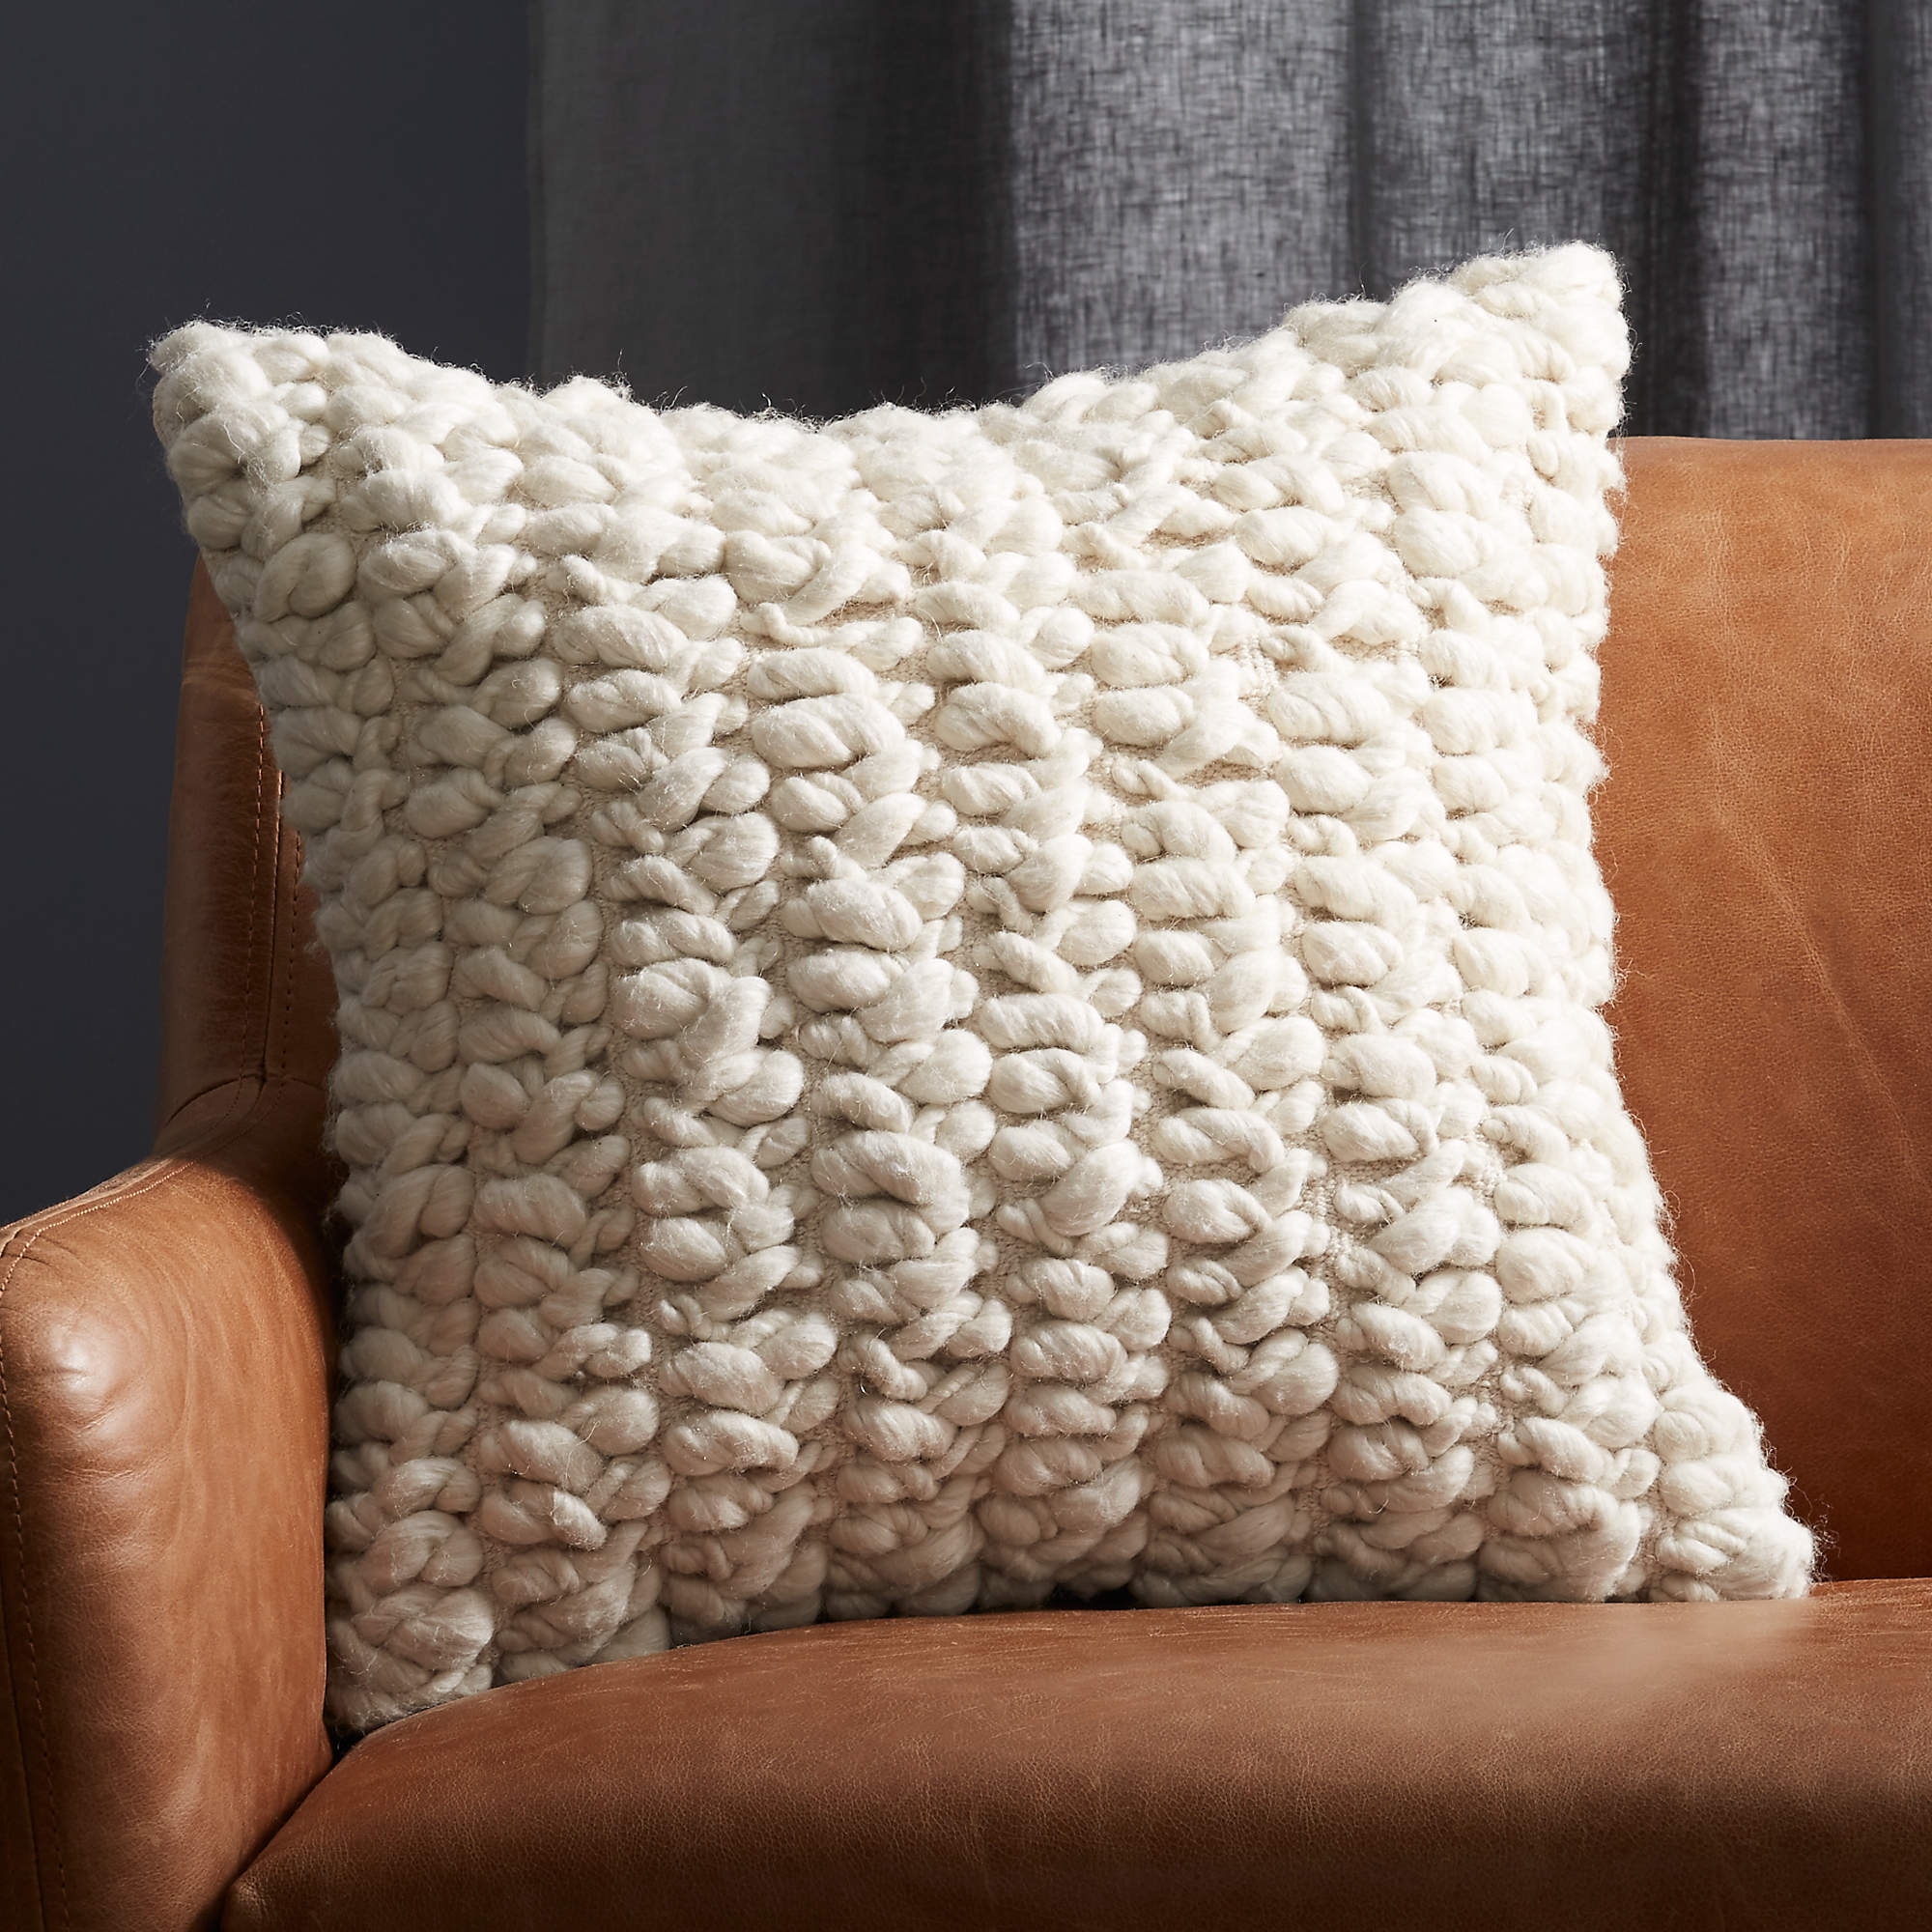 Tillie Wool Pillow, Ivory, 20" x 20" Feather-Down Insert - Image 1